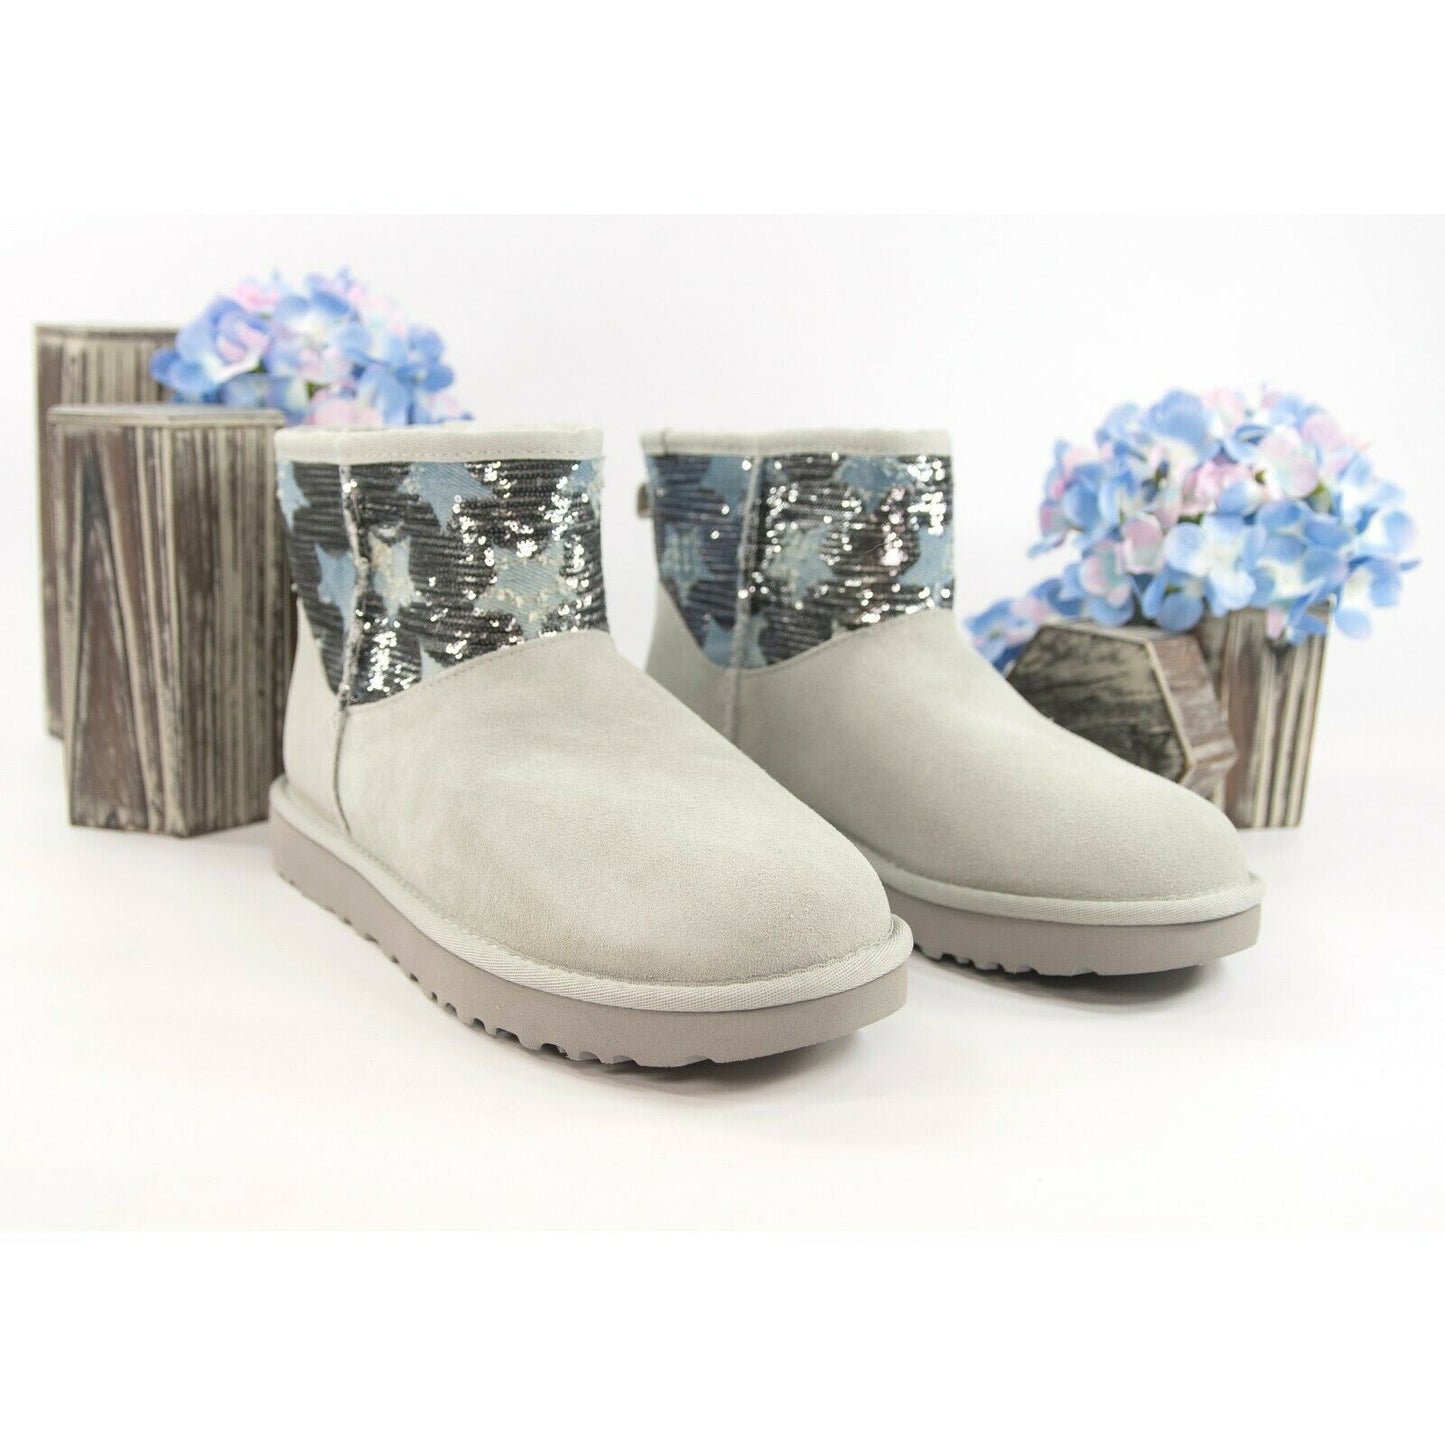 UGG Classic Mini Distressed Stars Sequin Sheepskin Suede Boots Size 7 NWOB